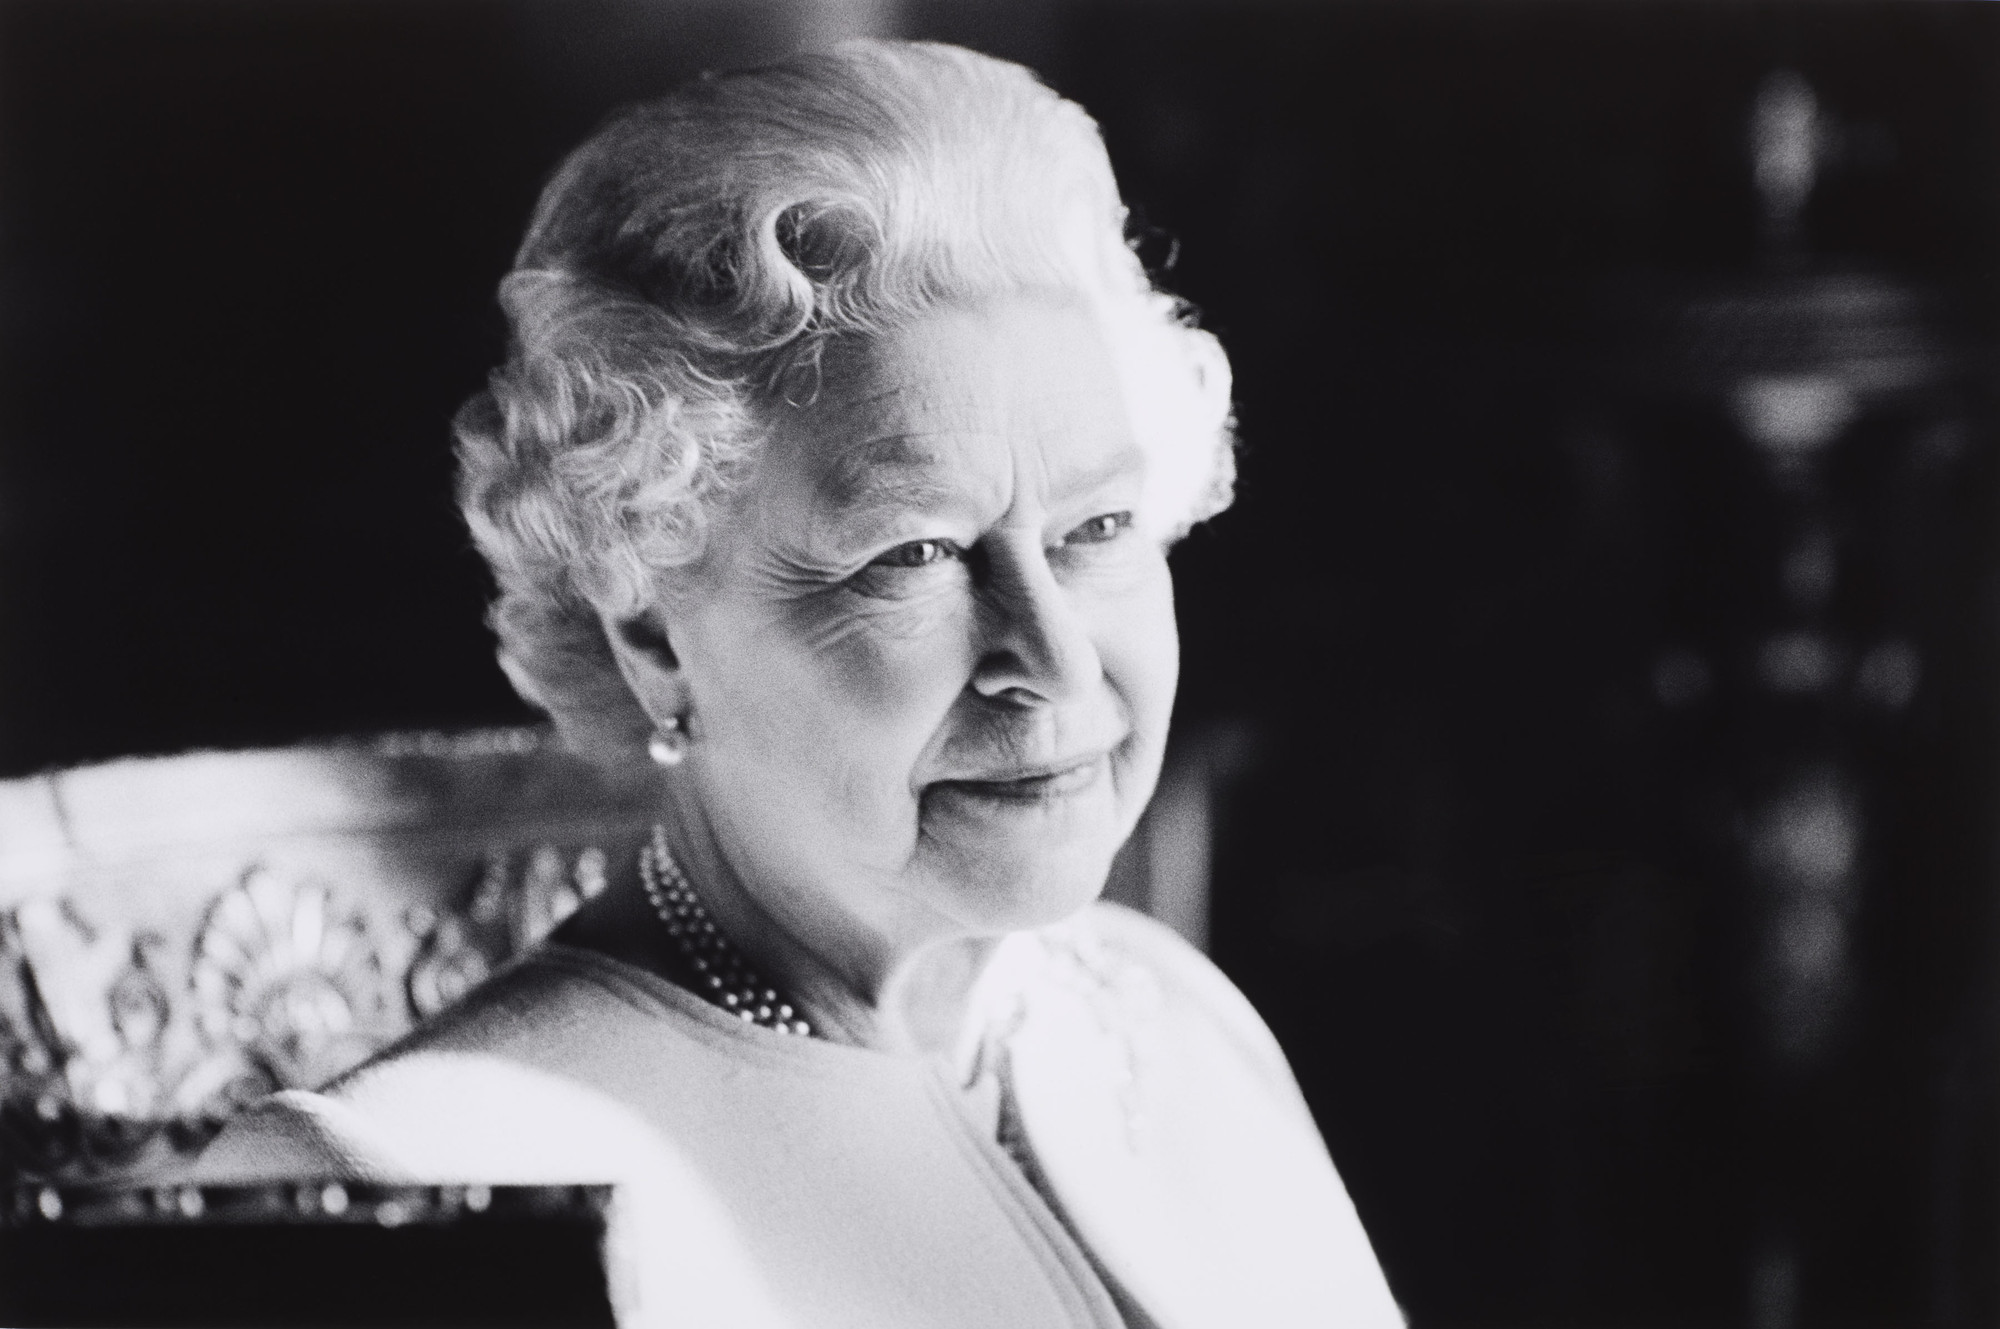 Tributes to Her Majesty The Queen, Elizabeth II 1926 - 2022